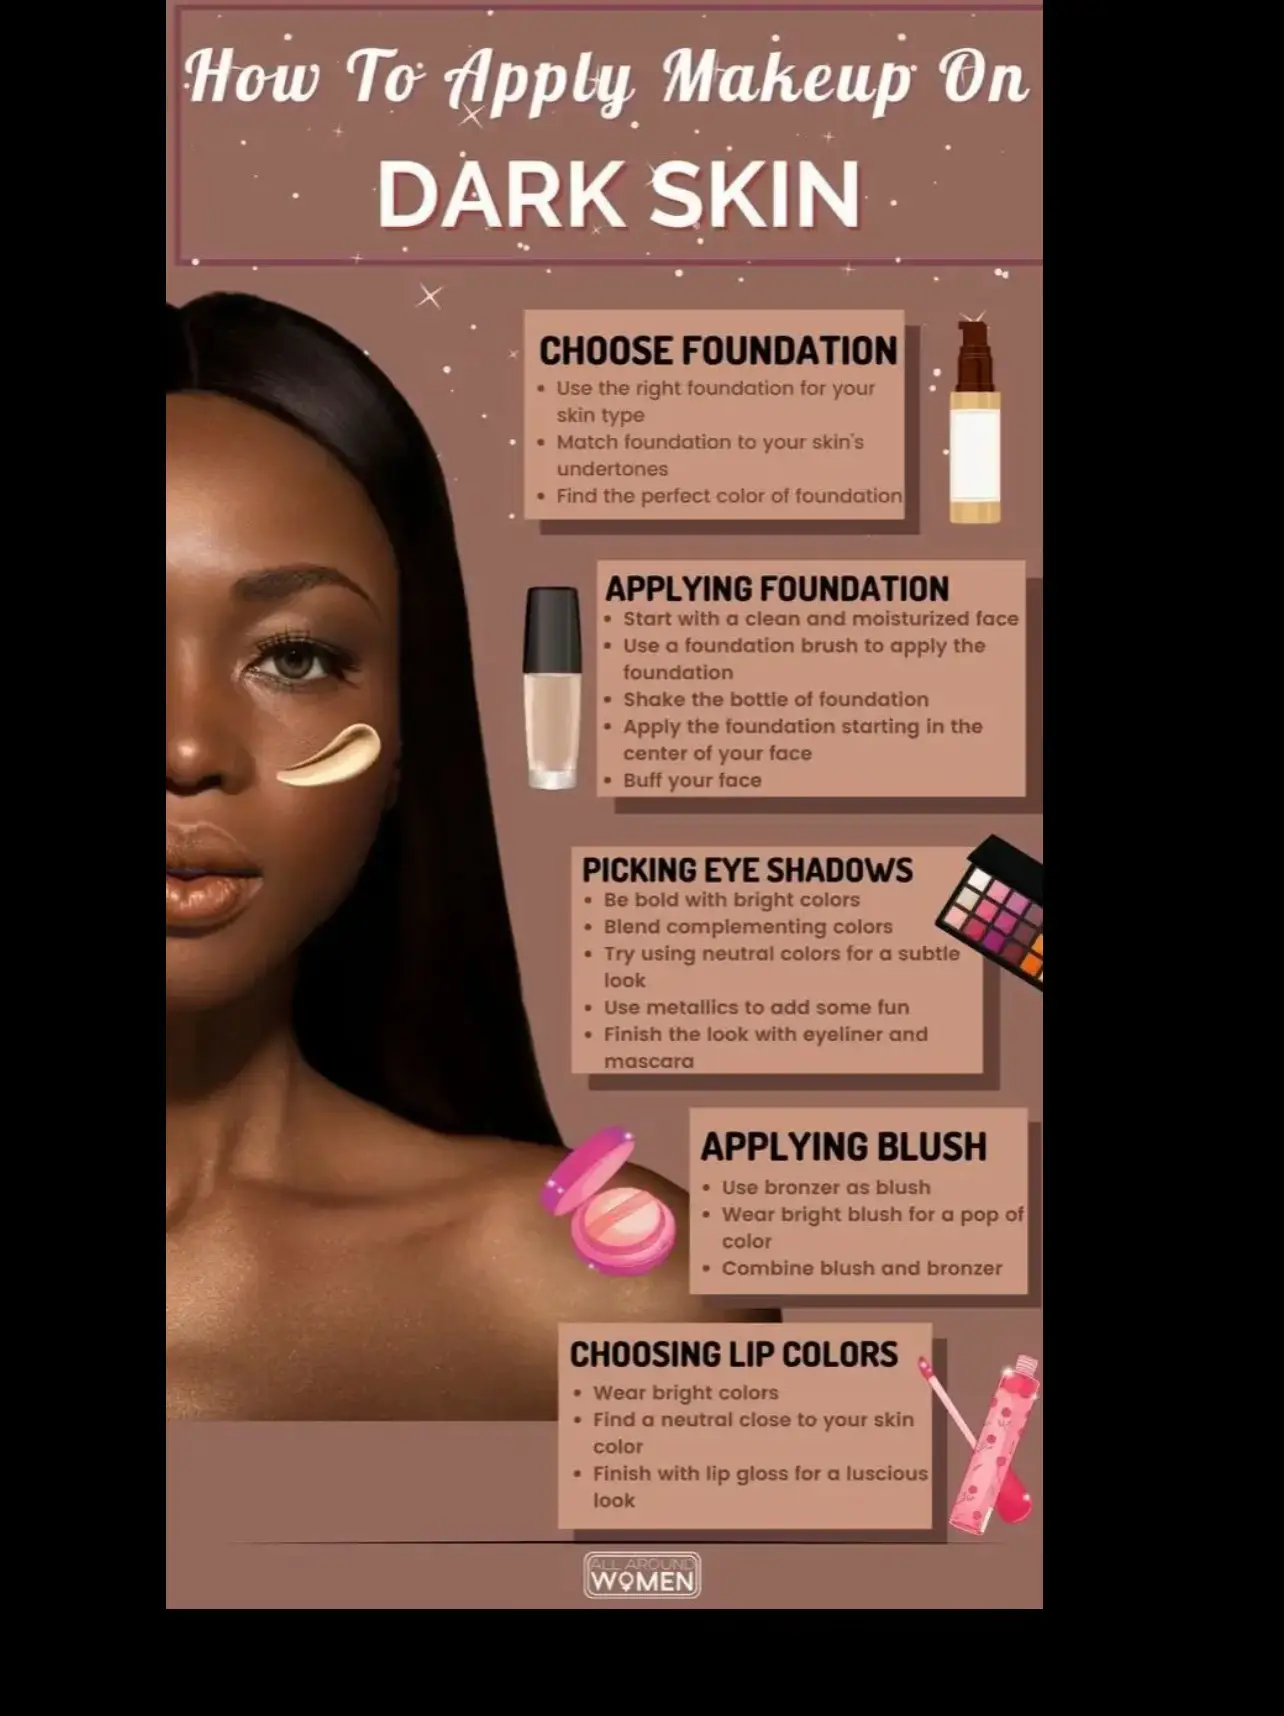 HOW TO DO A FULL FACE MAKEUP ON DARK SKIN// TUTORIAL 